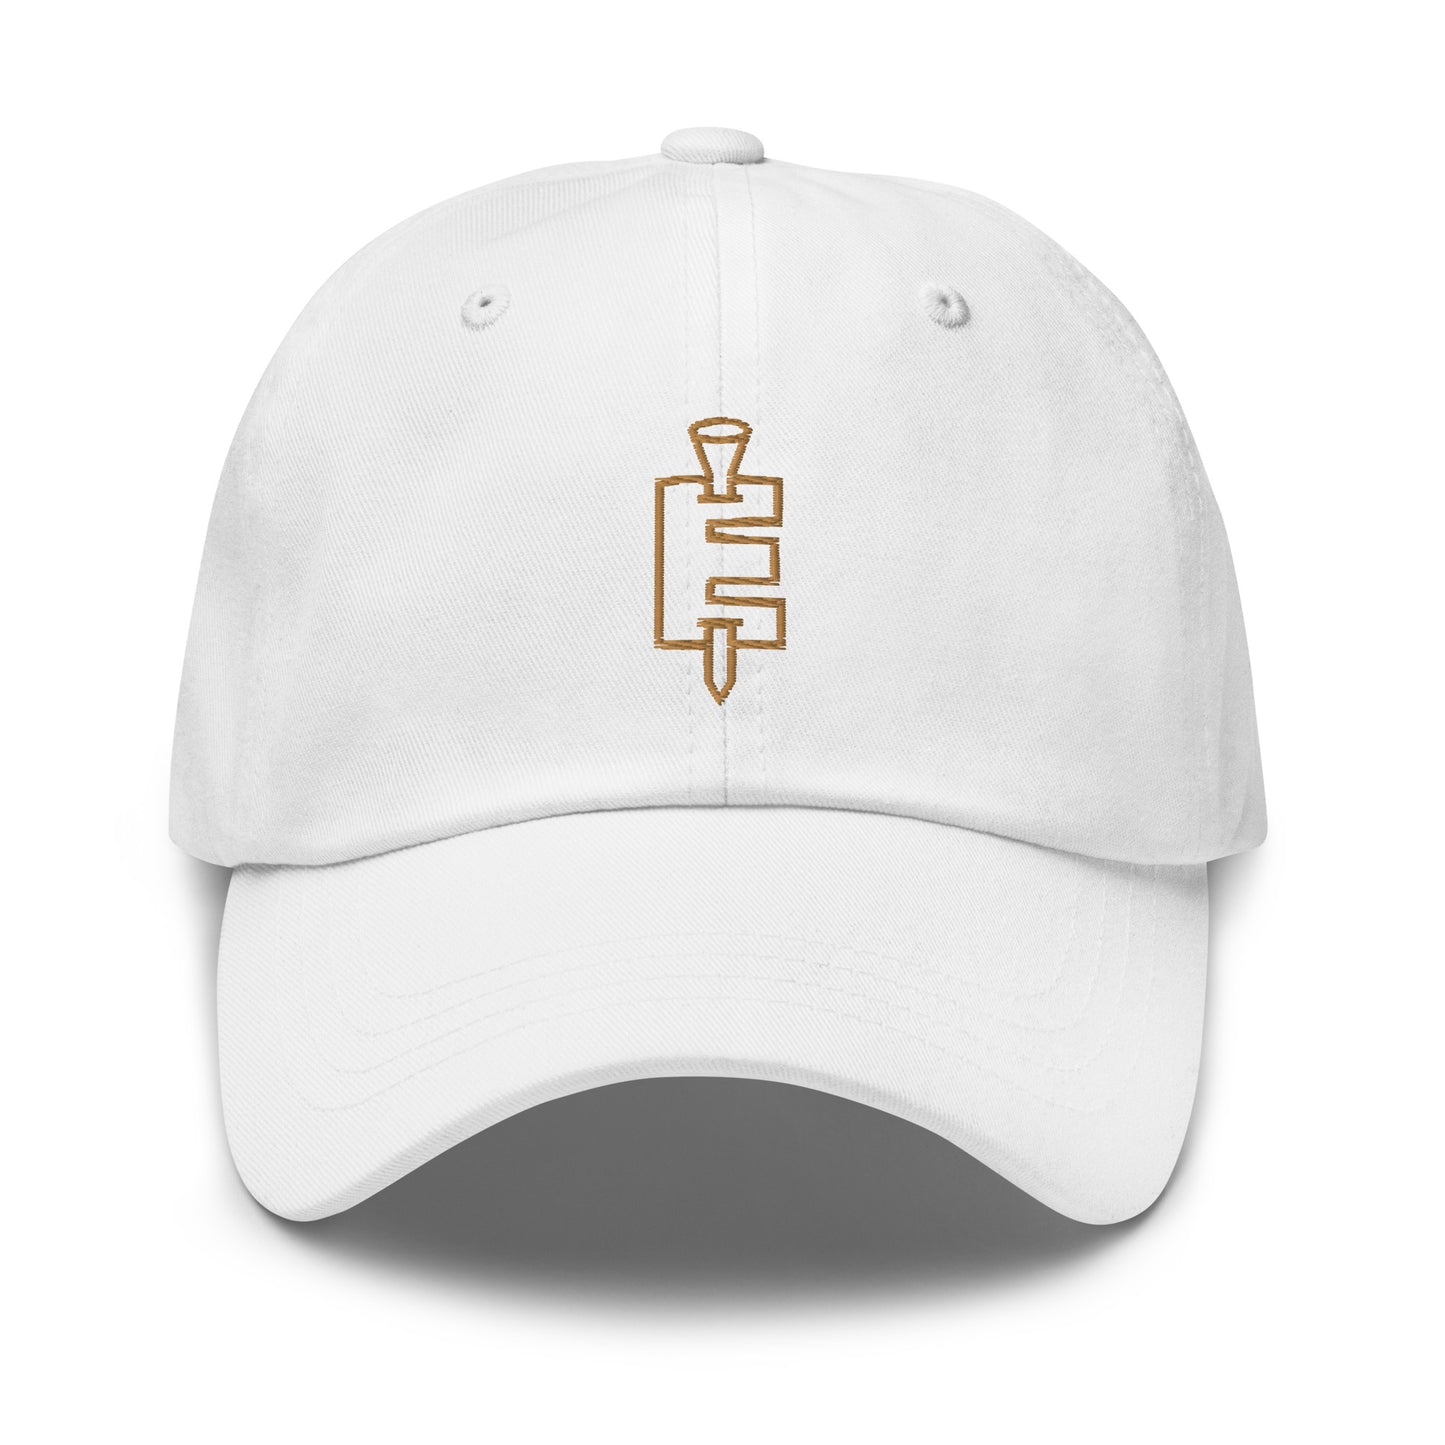 TEE IT UP CLASSIC DAD HAT